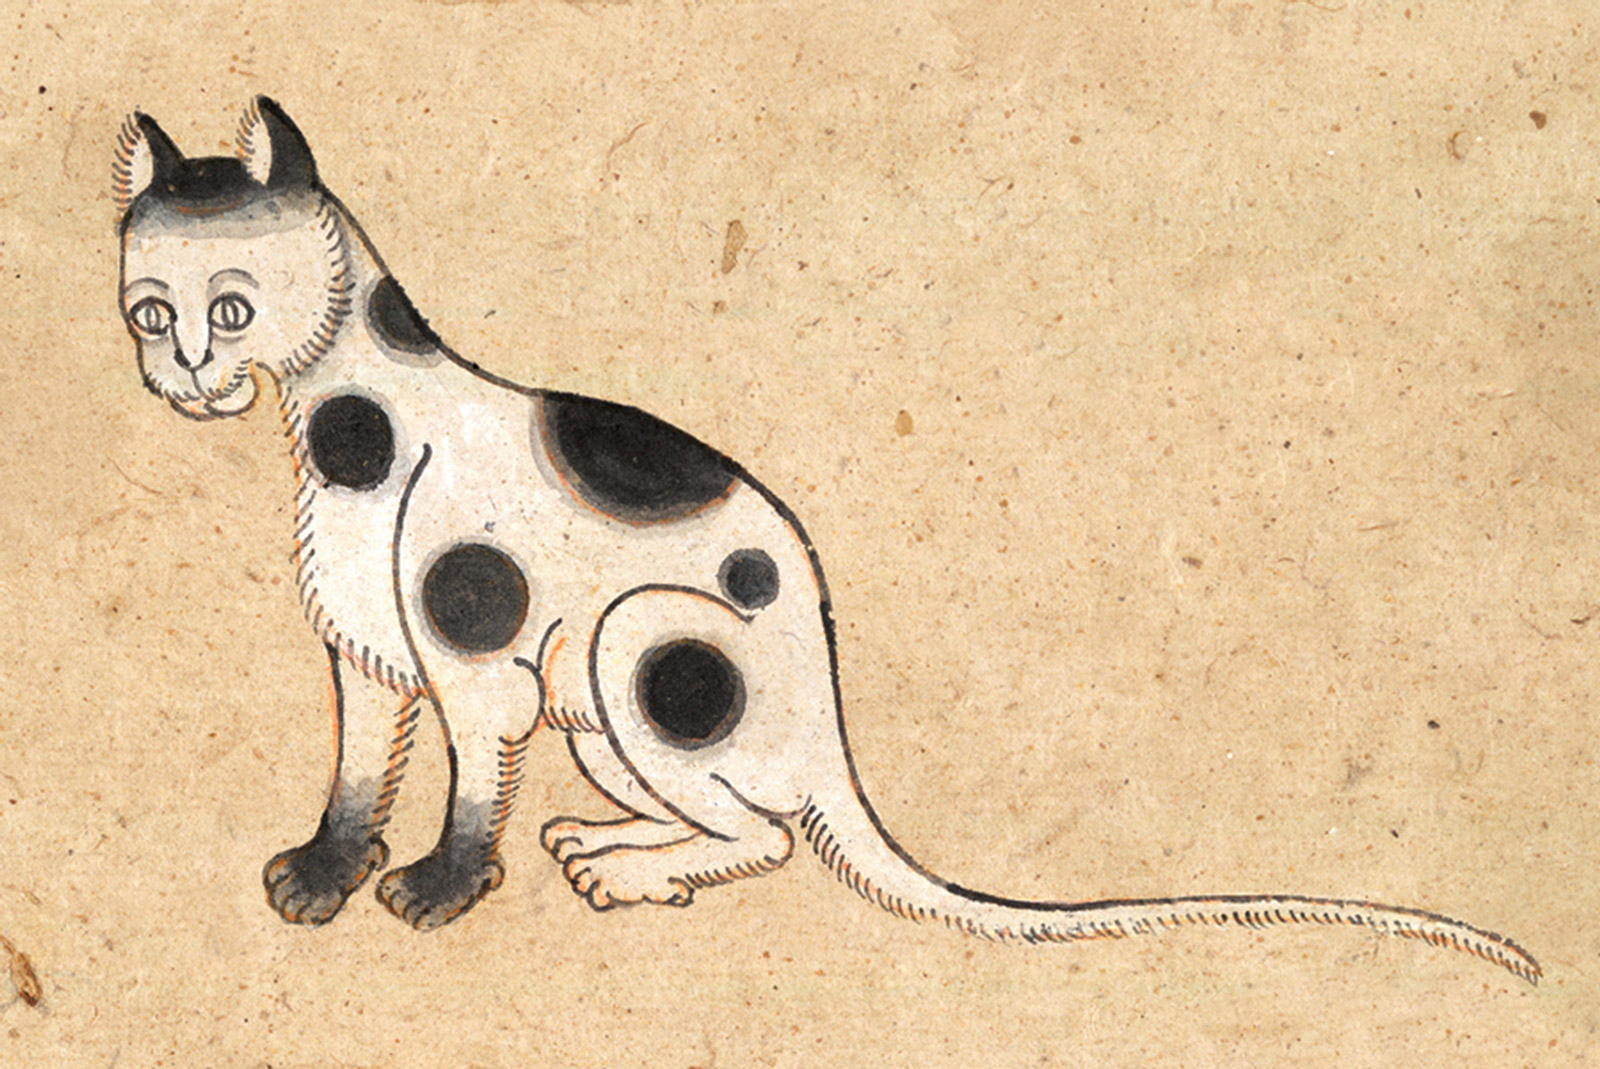 An illustration of a Kao Taem (Nine Points) cat from a mid-nineteenth-century manuscript titled “Tamra Maew.” The accompanying caption reads: “Alternating circles on neck, head, and hind thighs,
Plus on both shoulders and front paws,
Black covering the ends of both paws.
Nine horse-like black spots on an all-white background.”